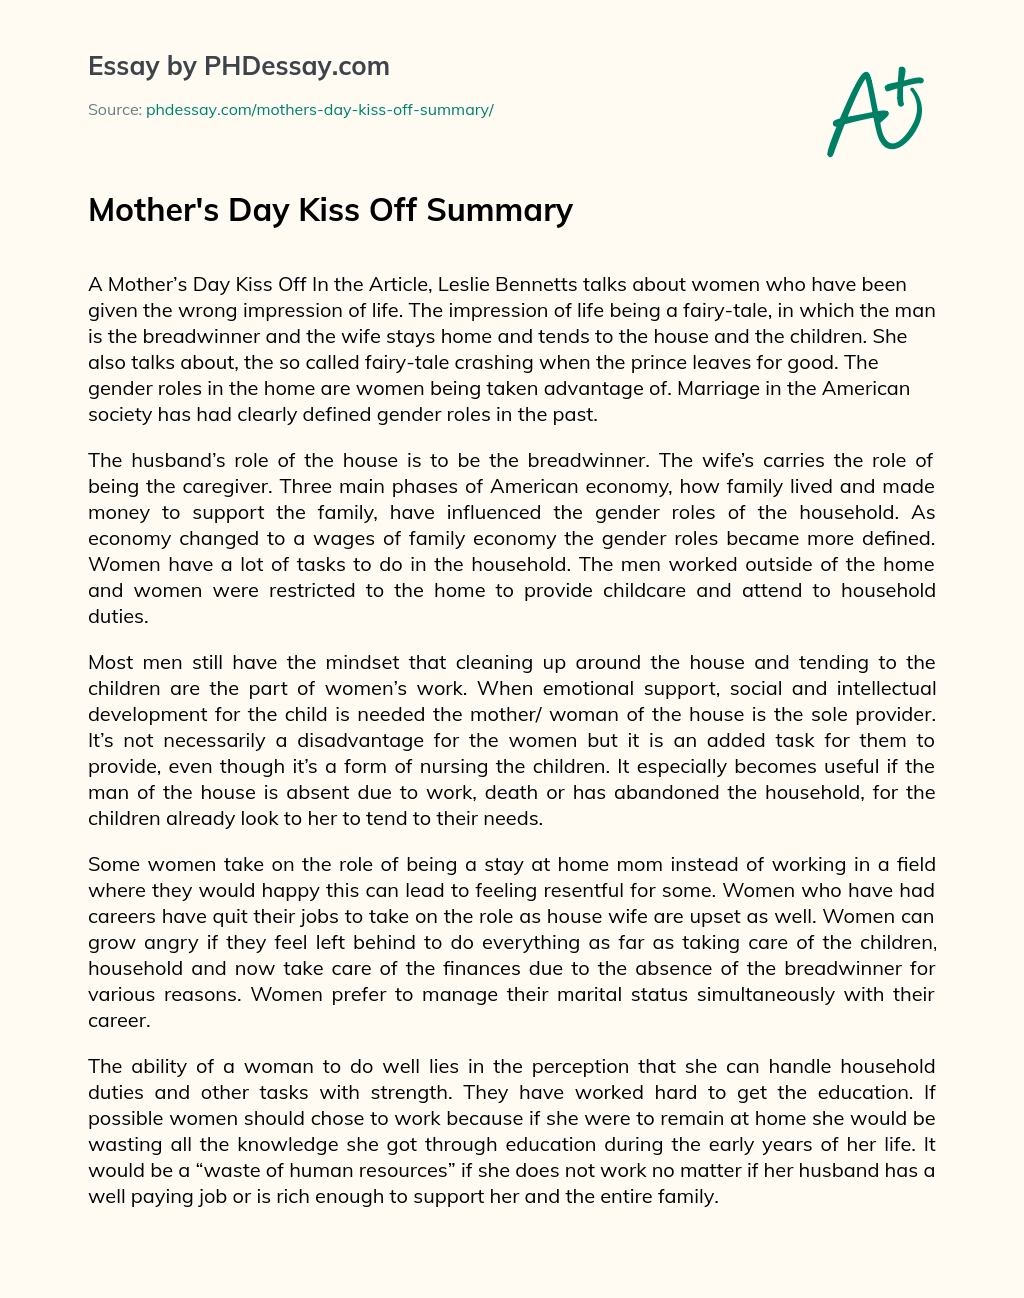 Mother’s Day Kiss Off Summary essay